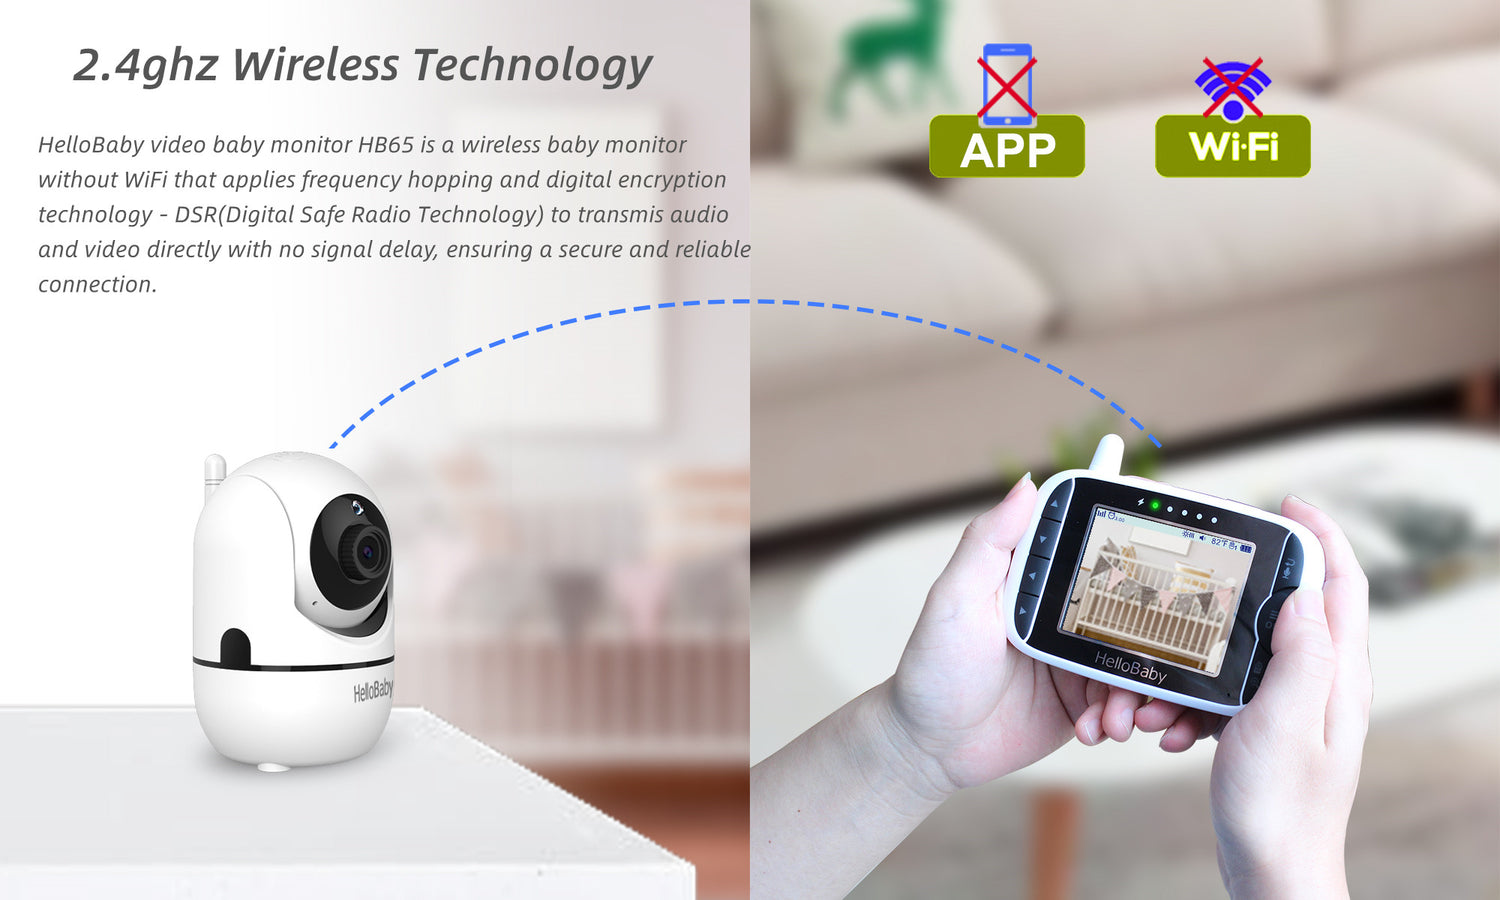 HelloBaby 2.4GHz wireless baby monitor without delay